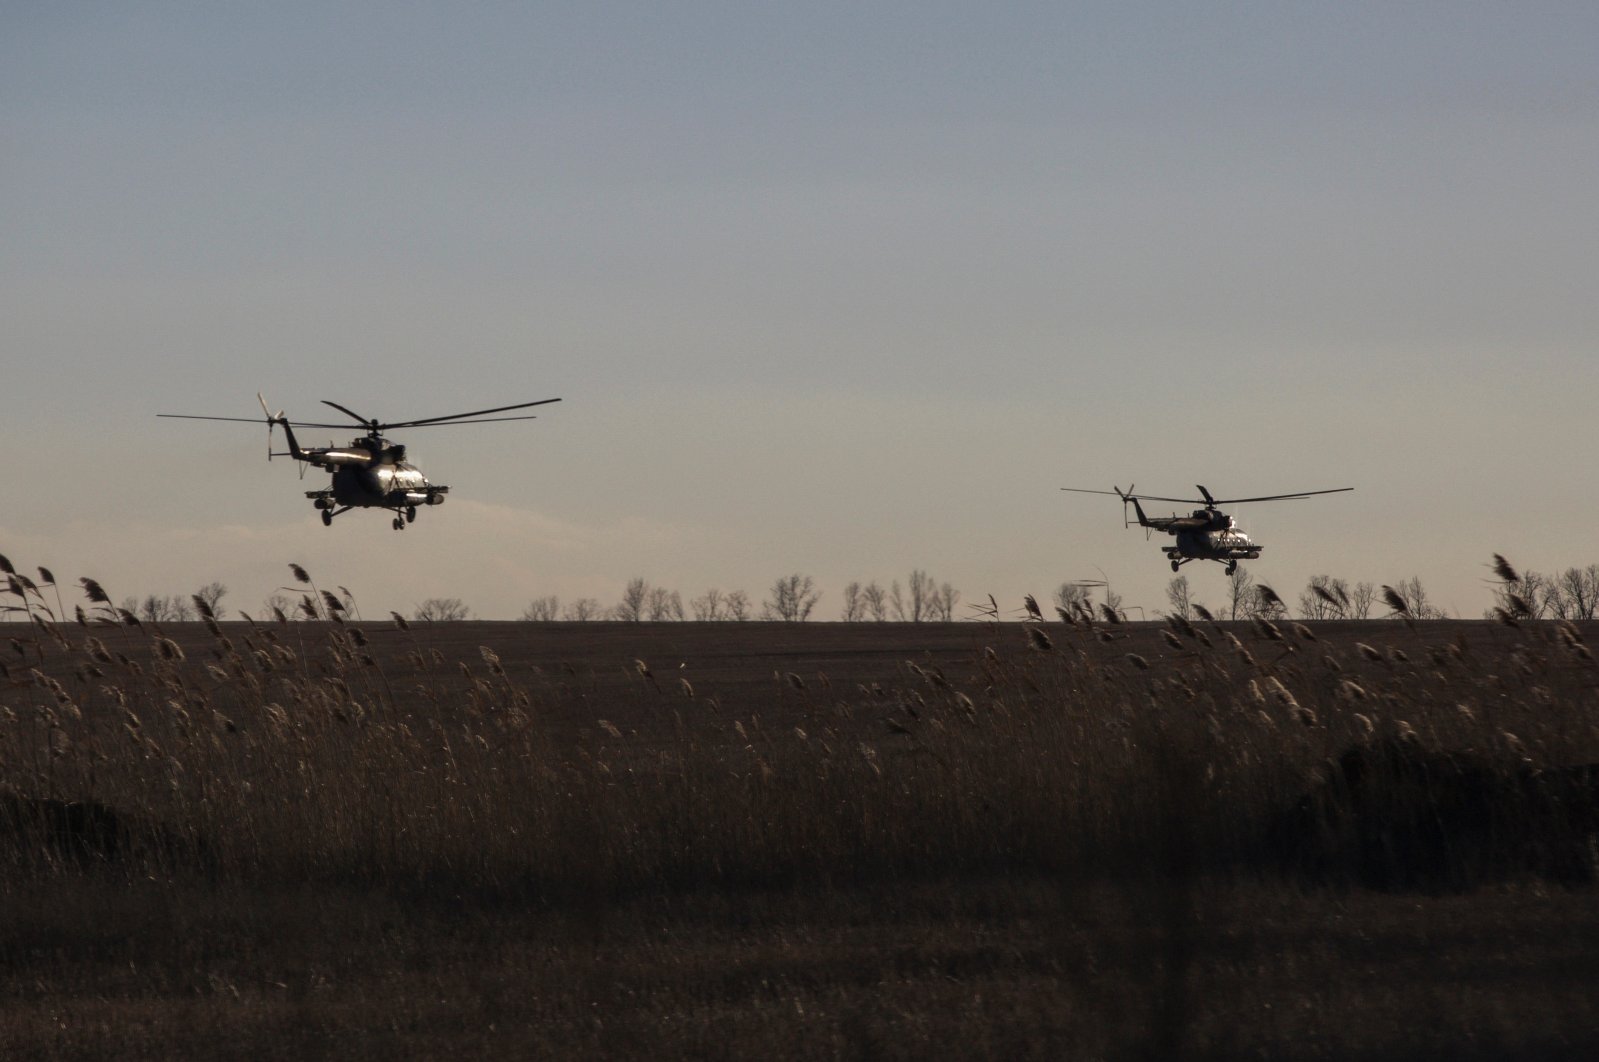 Ukrainian Armed Forces helicopters fly over a field outside the frontline town of Bakhmut, Ukraine, March 5, 2023. (Reuters Photo)